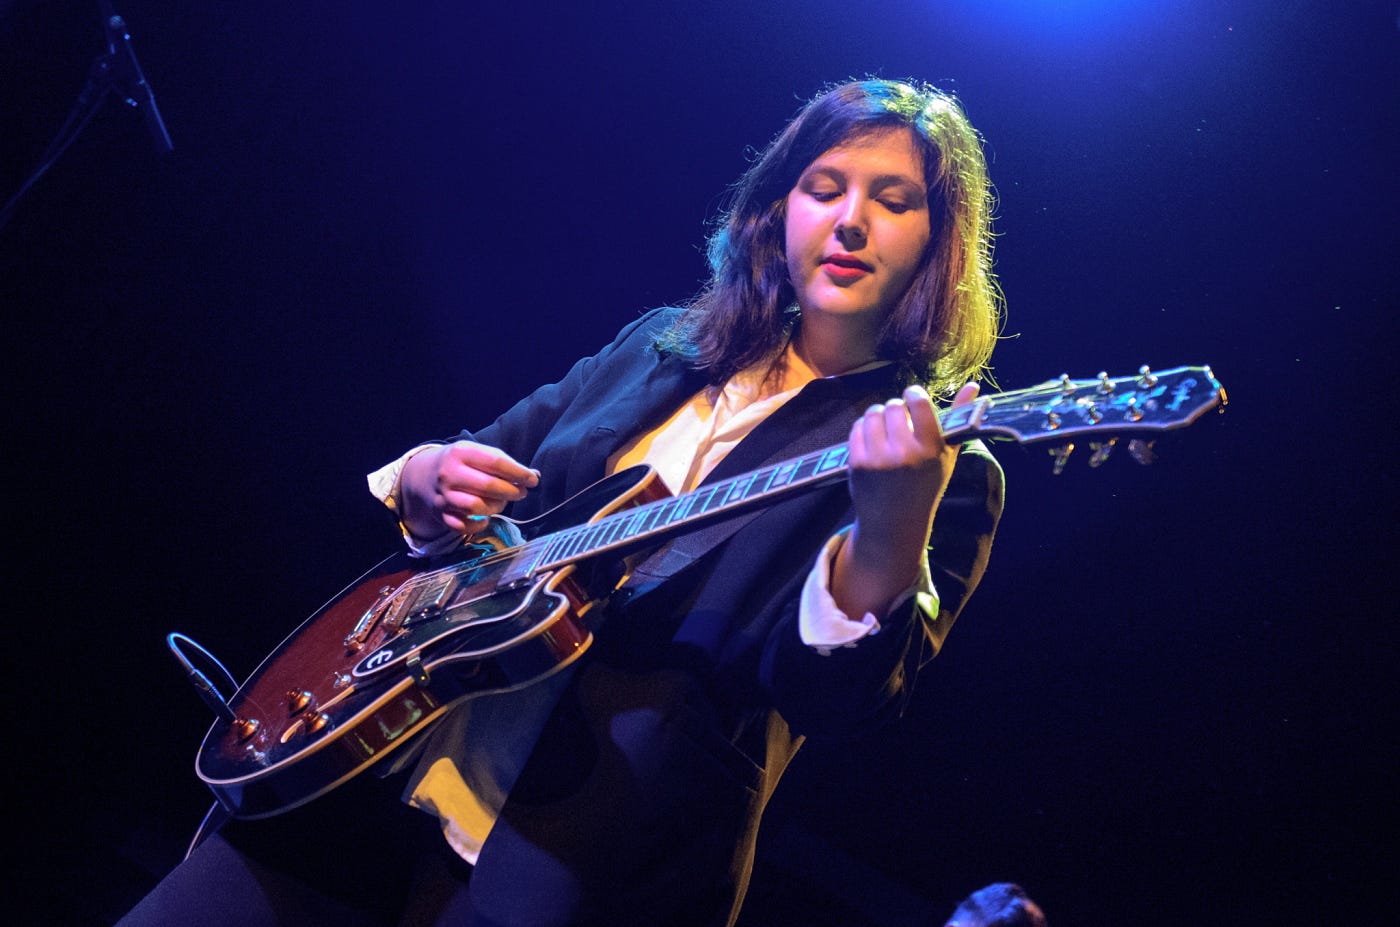 The 7 Sadnesses of Lucy Dacus' “Night Shift”, by Thom Crowley